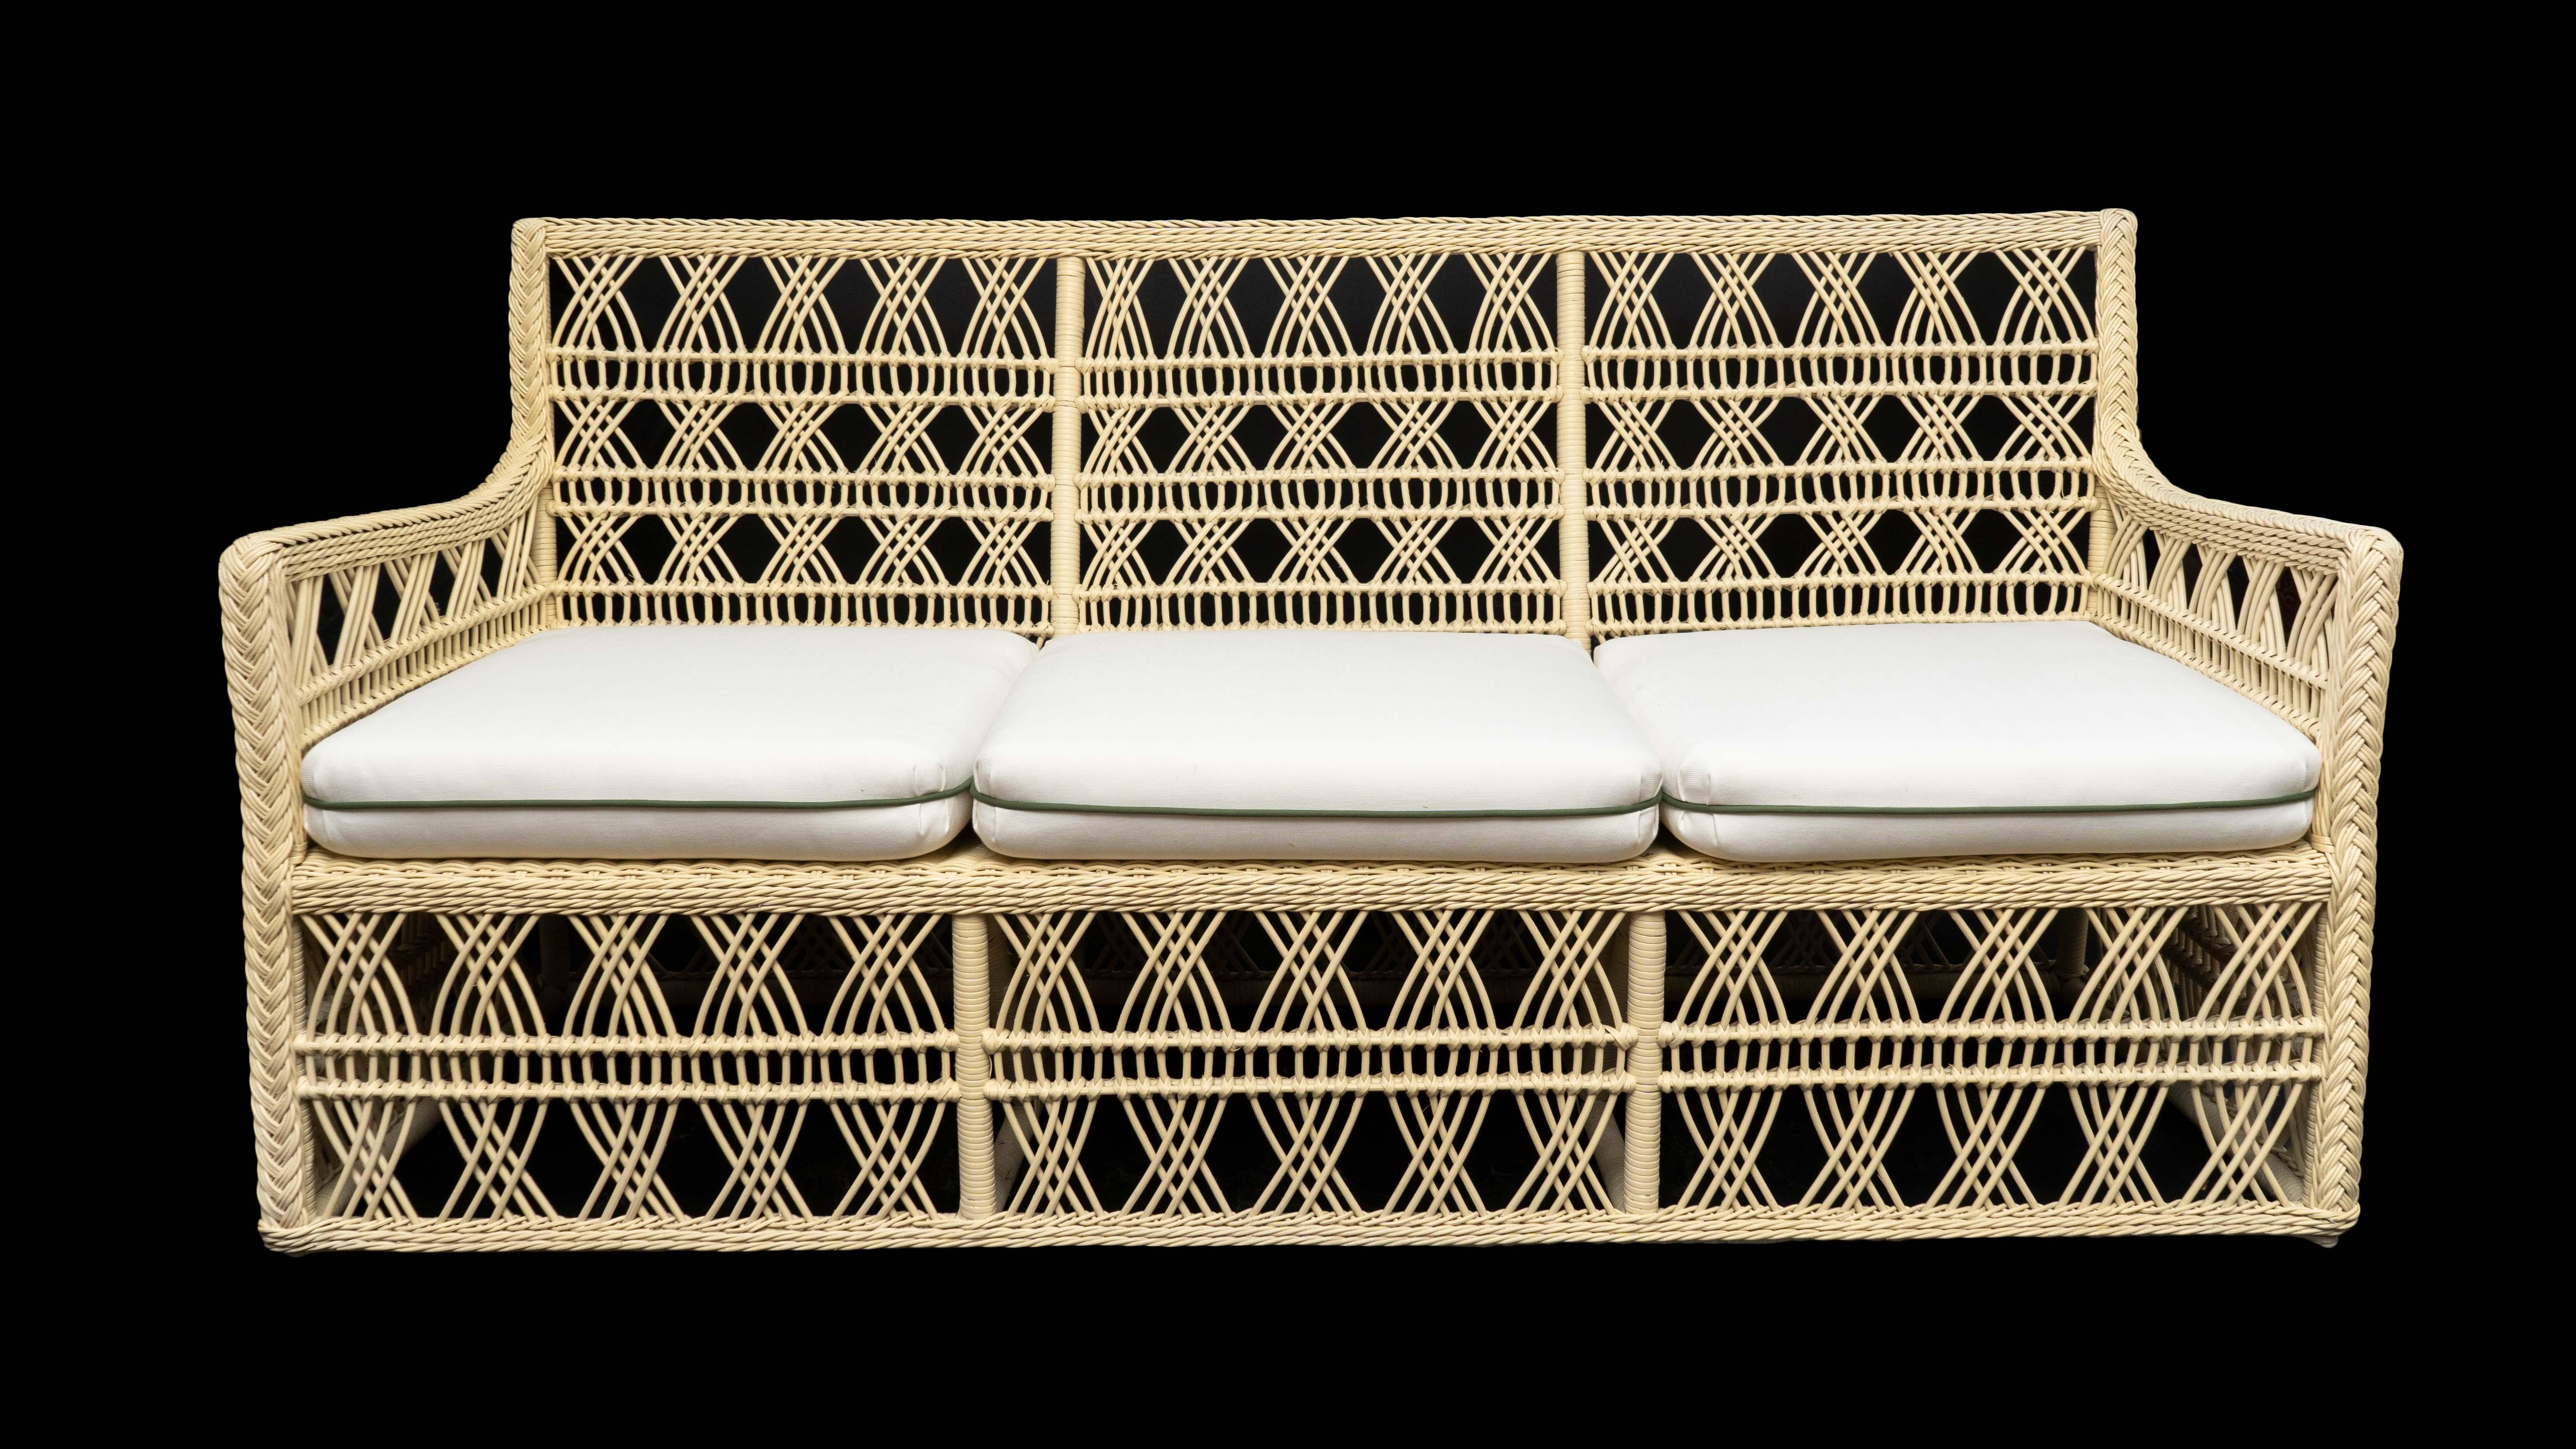 Rattan Trellis sofa. Made for Creel and Gow in Tangier Morocco.

Measures: 30